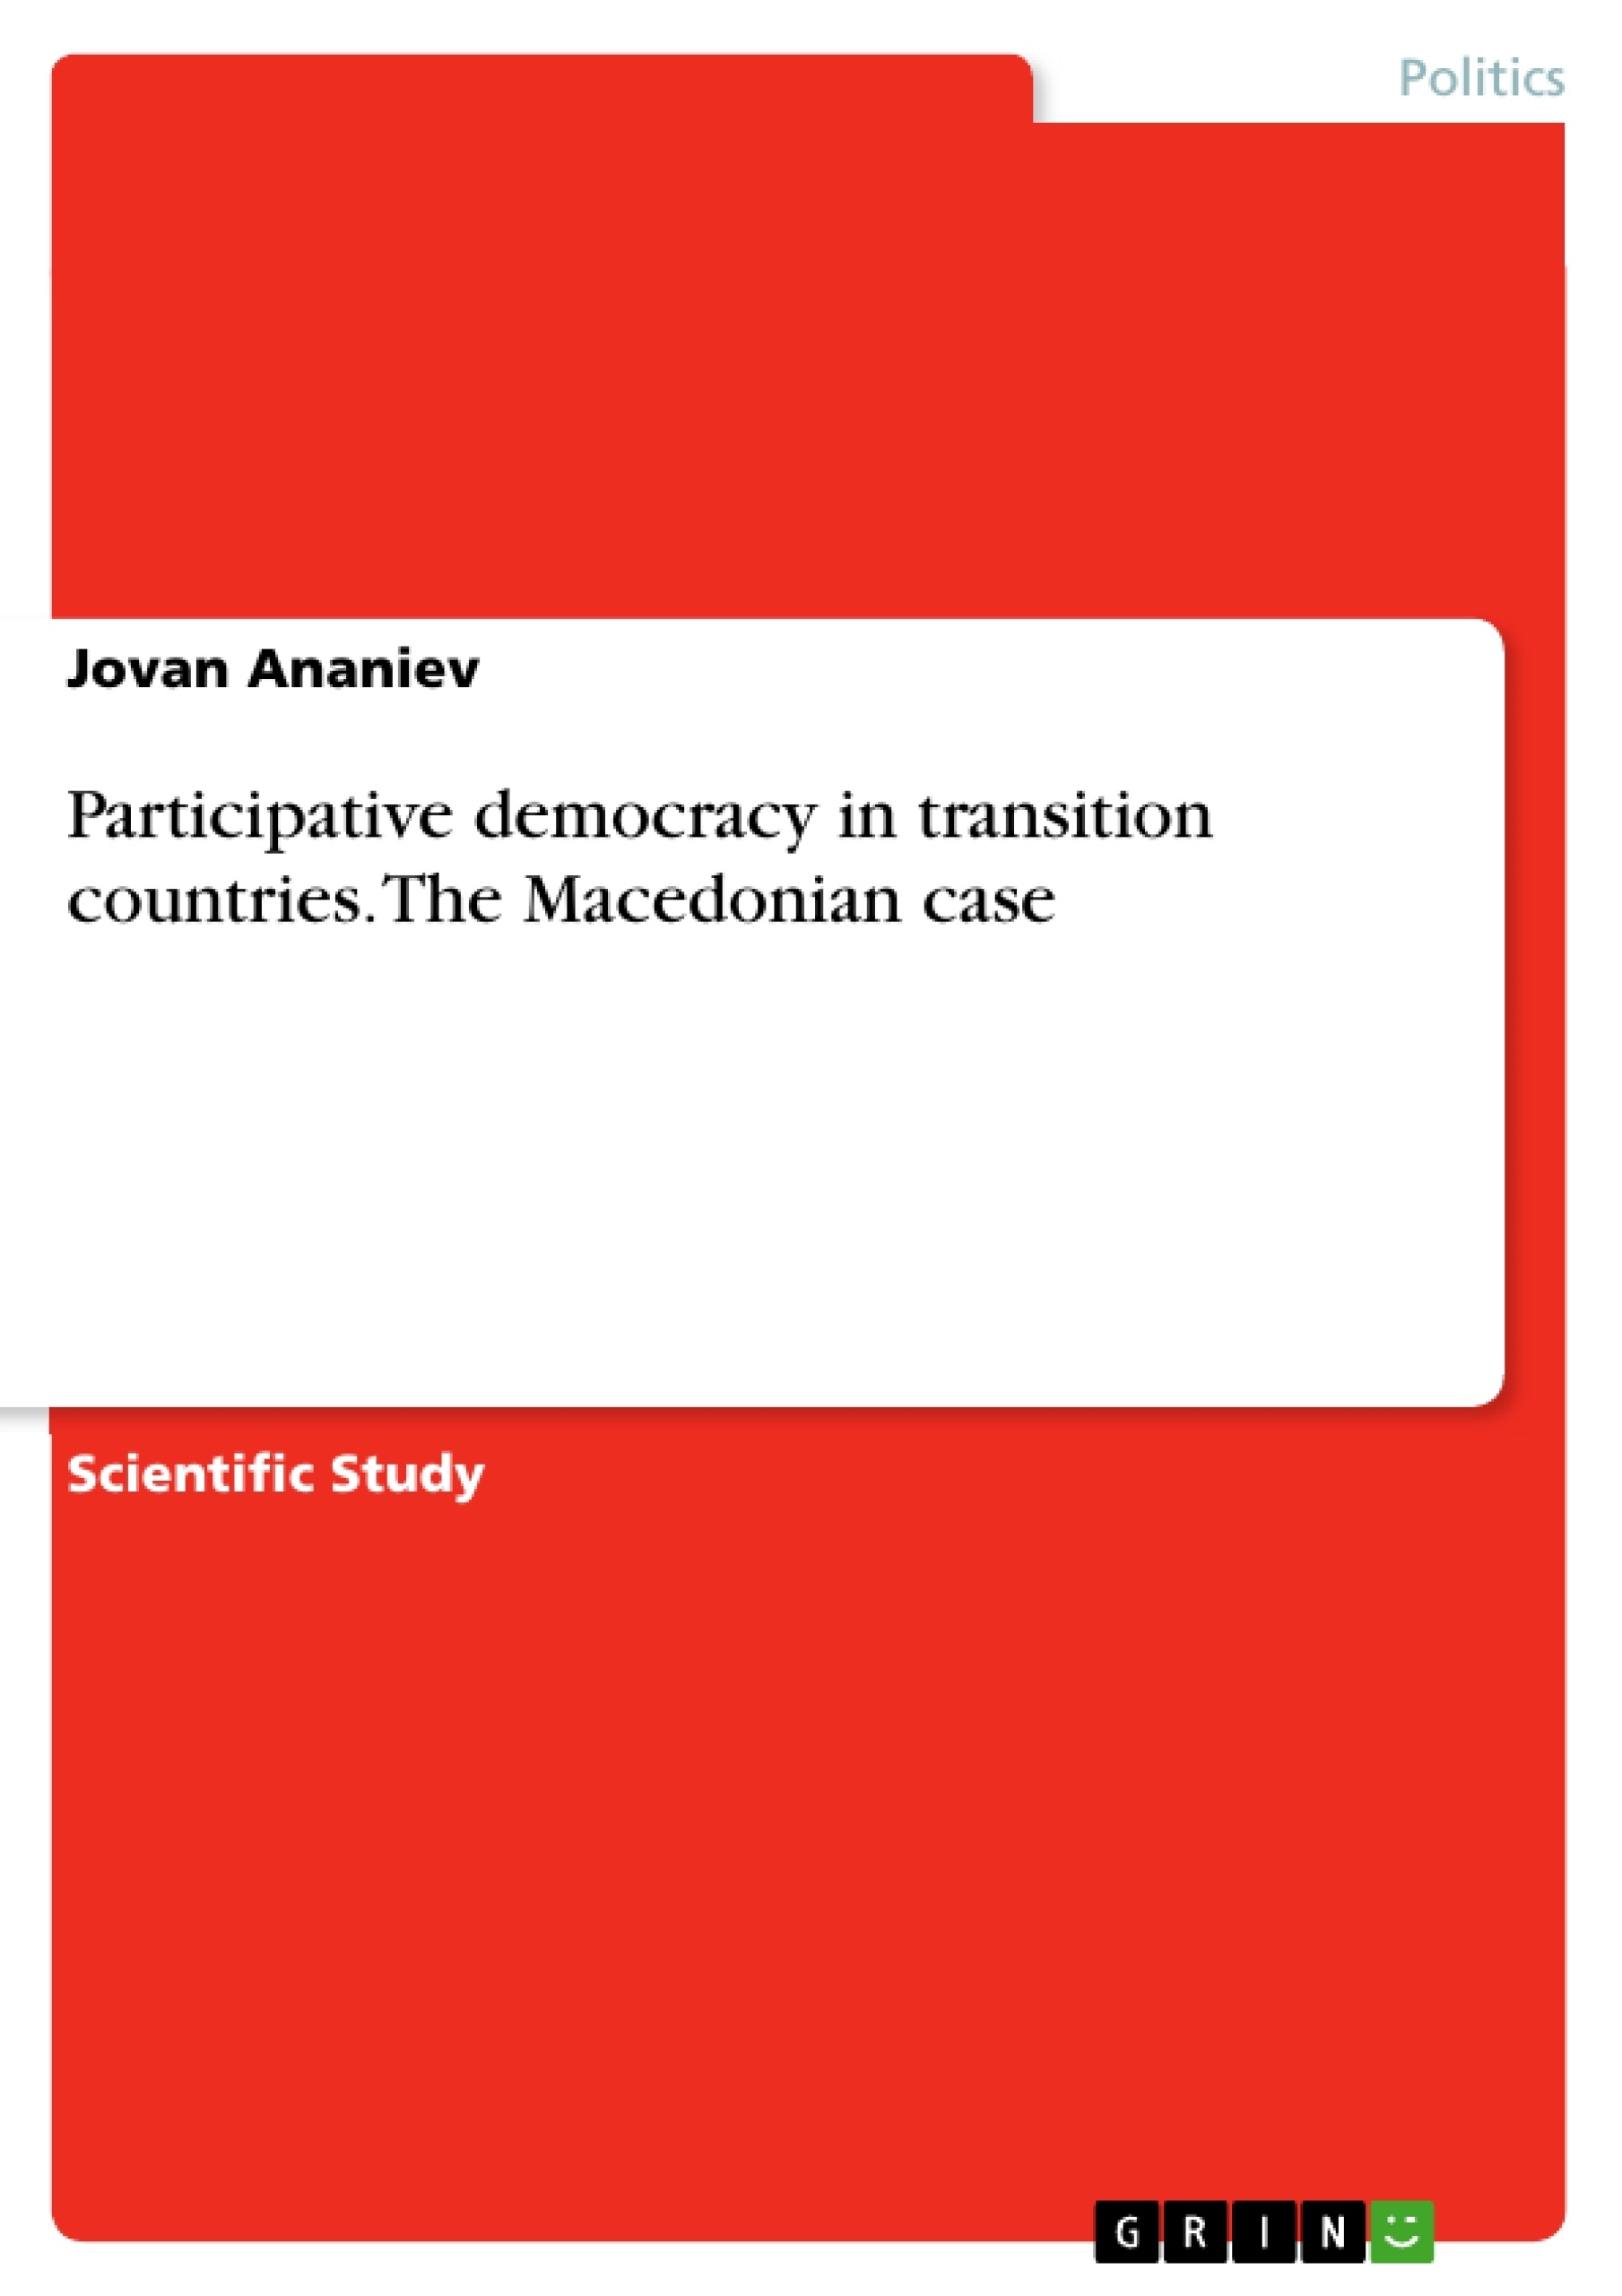 Título: Participative democracy in transition countries. The Macedonian case